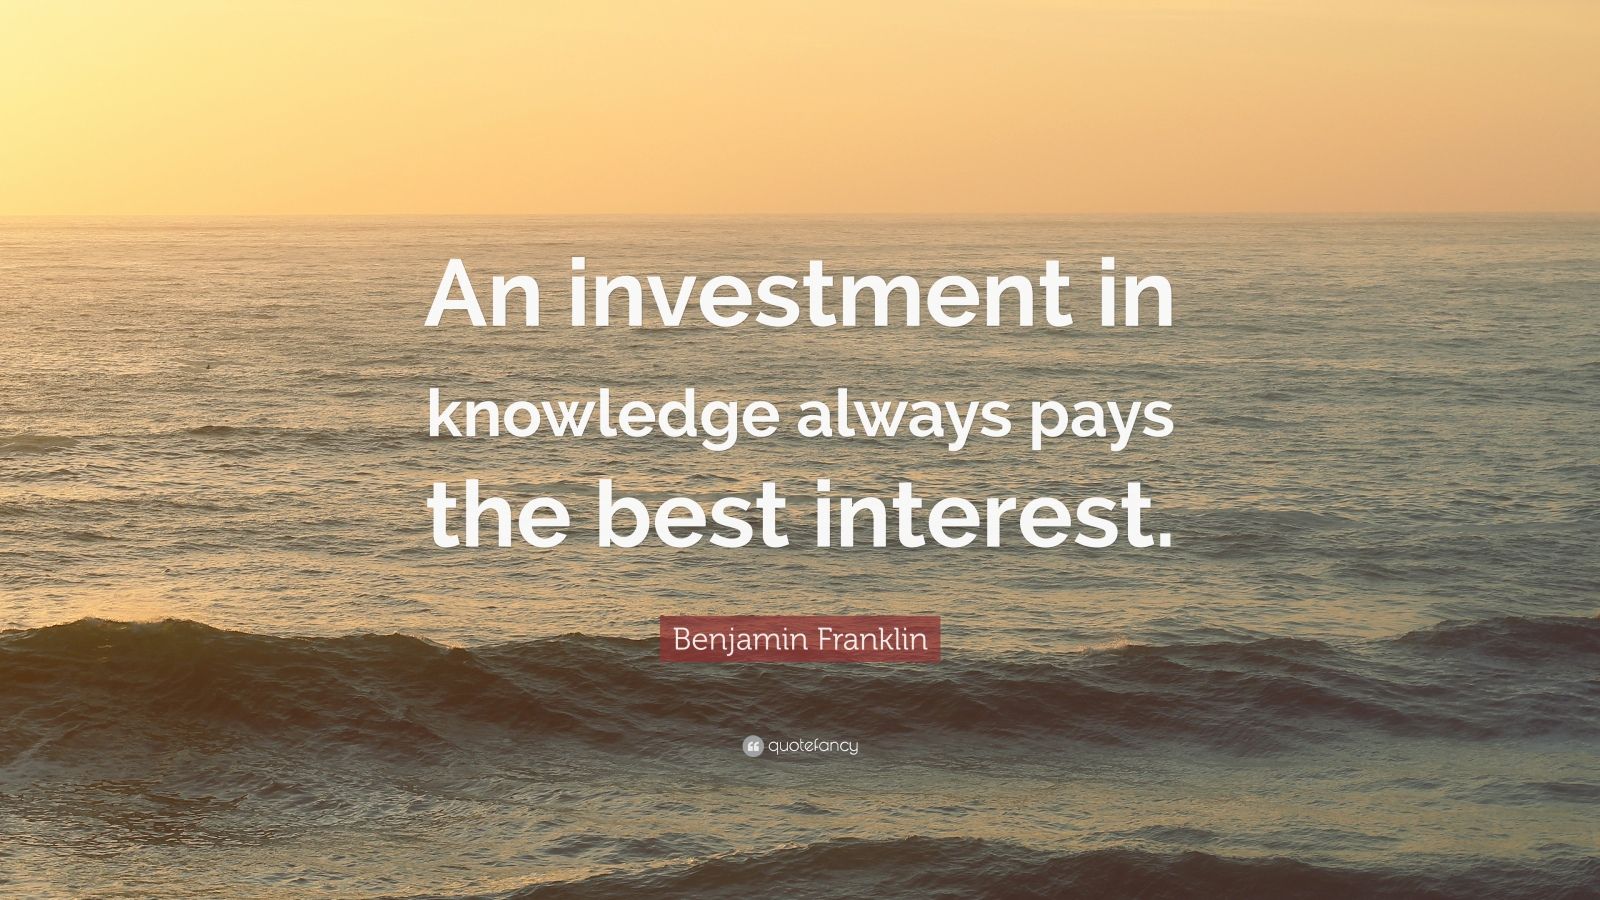 essay on an investment in knowledge pays the best interest